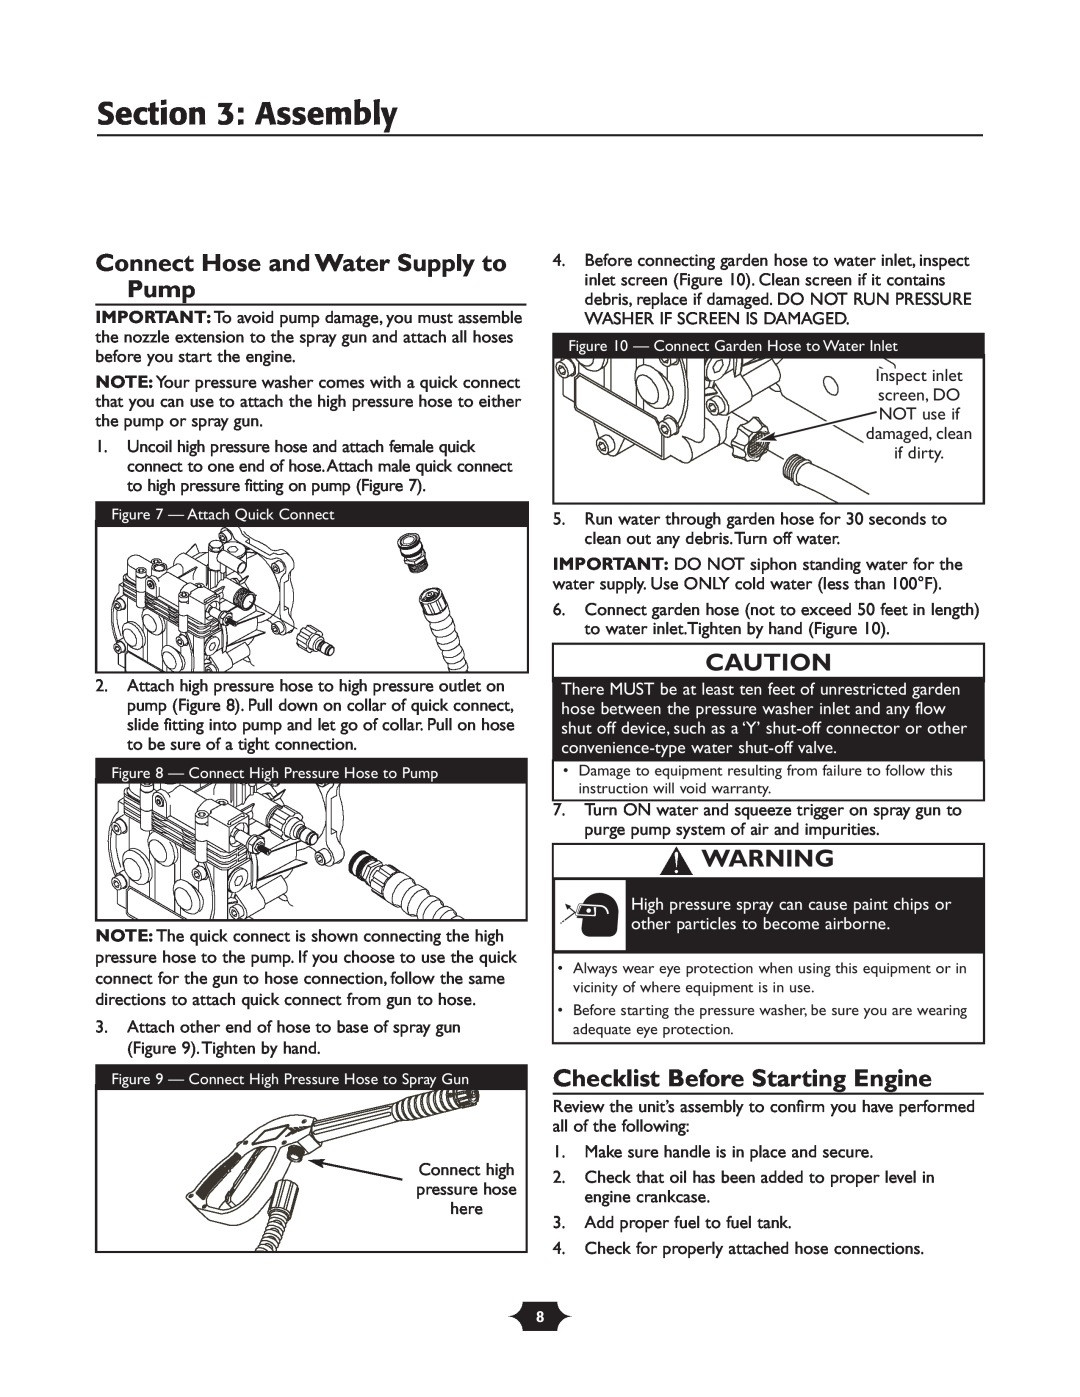 Briggs & Stratton 1903 owner manual Connect Hose and Water Supply to Pump, Checklist Before Starting Engine, Assembly 